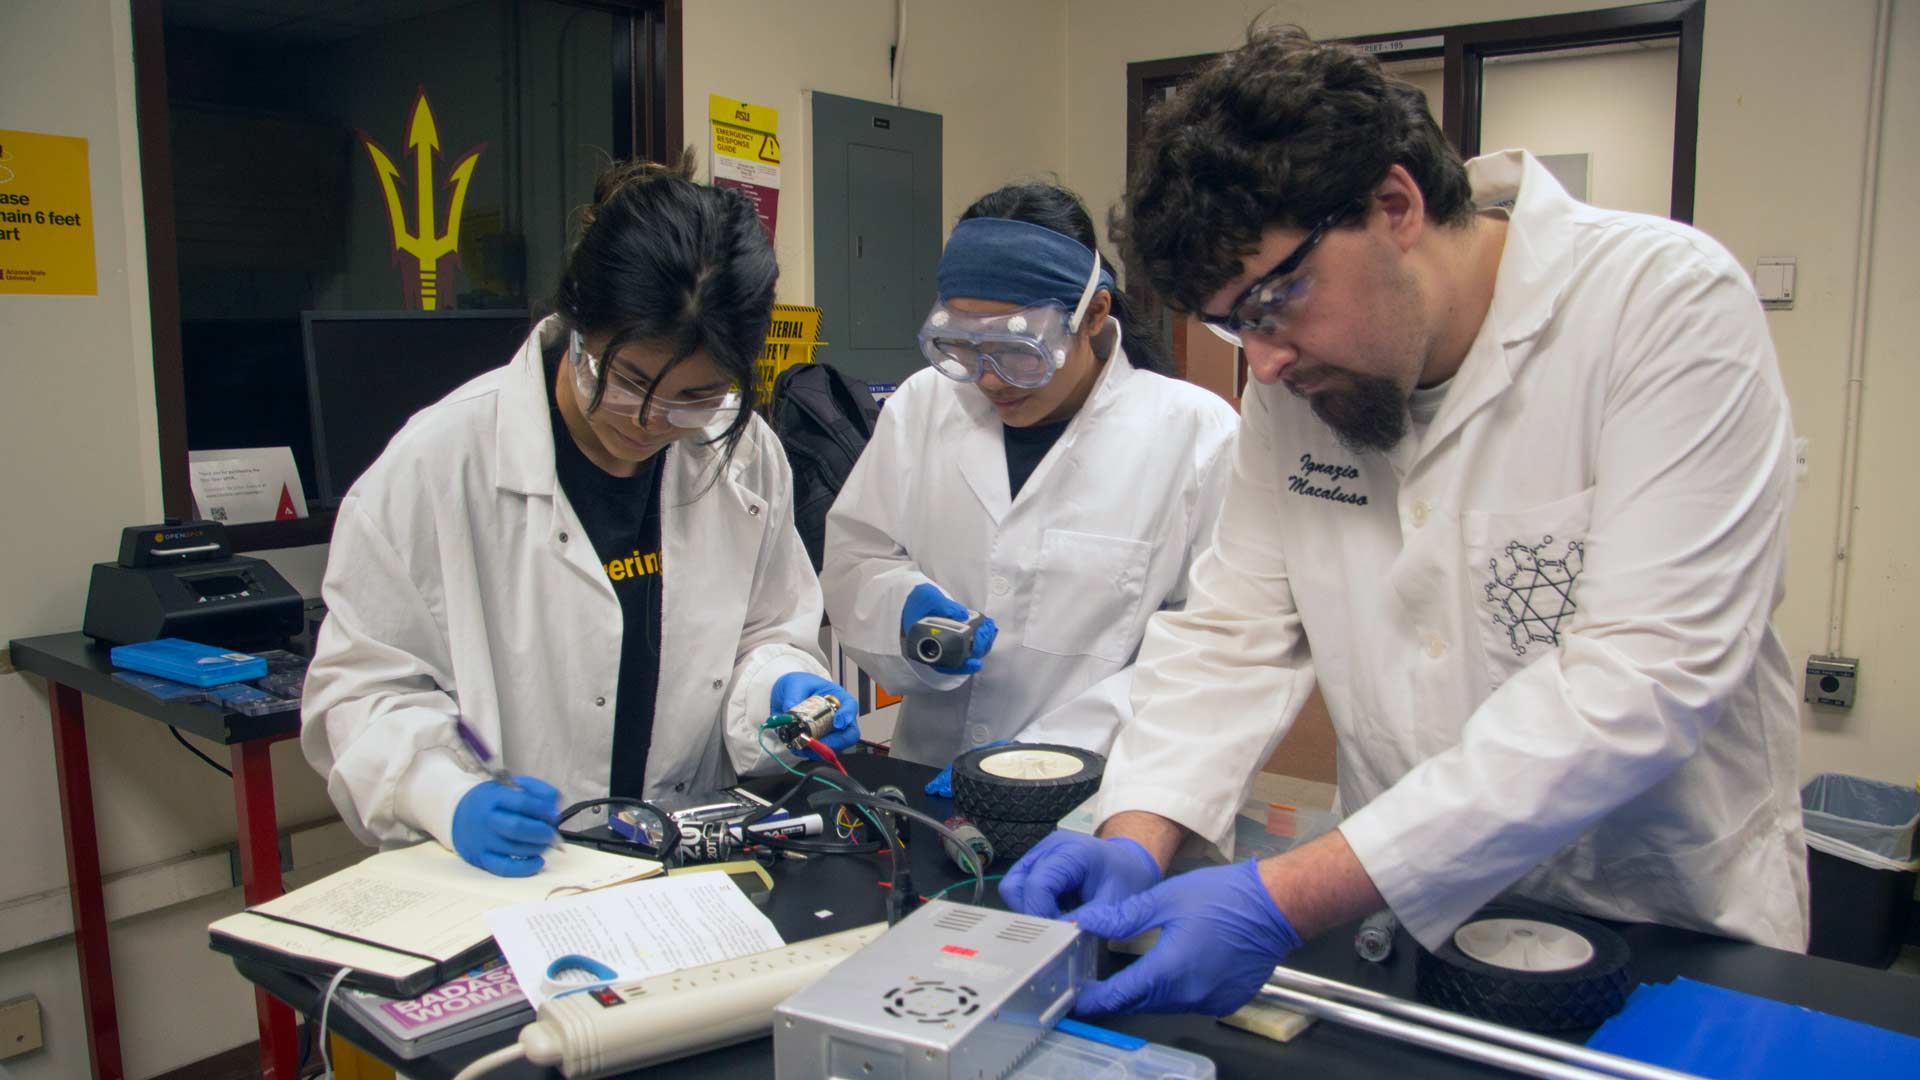 AIChE students working in lab